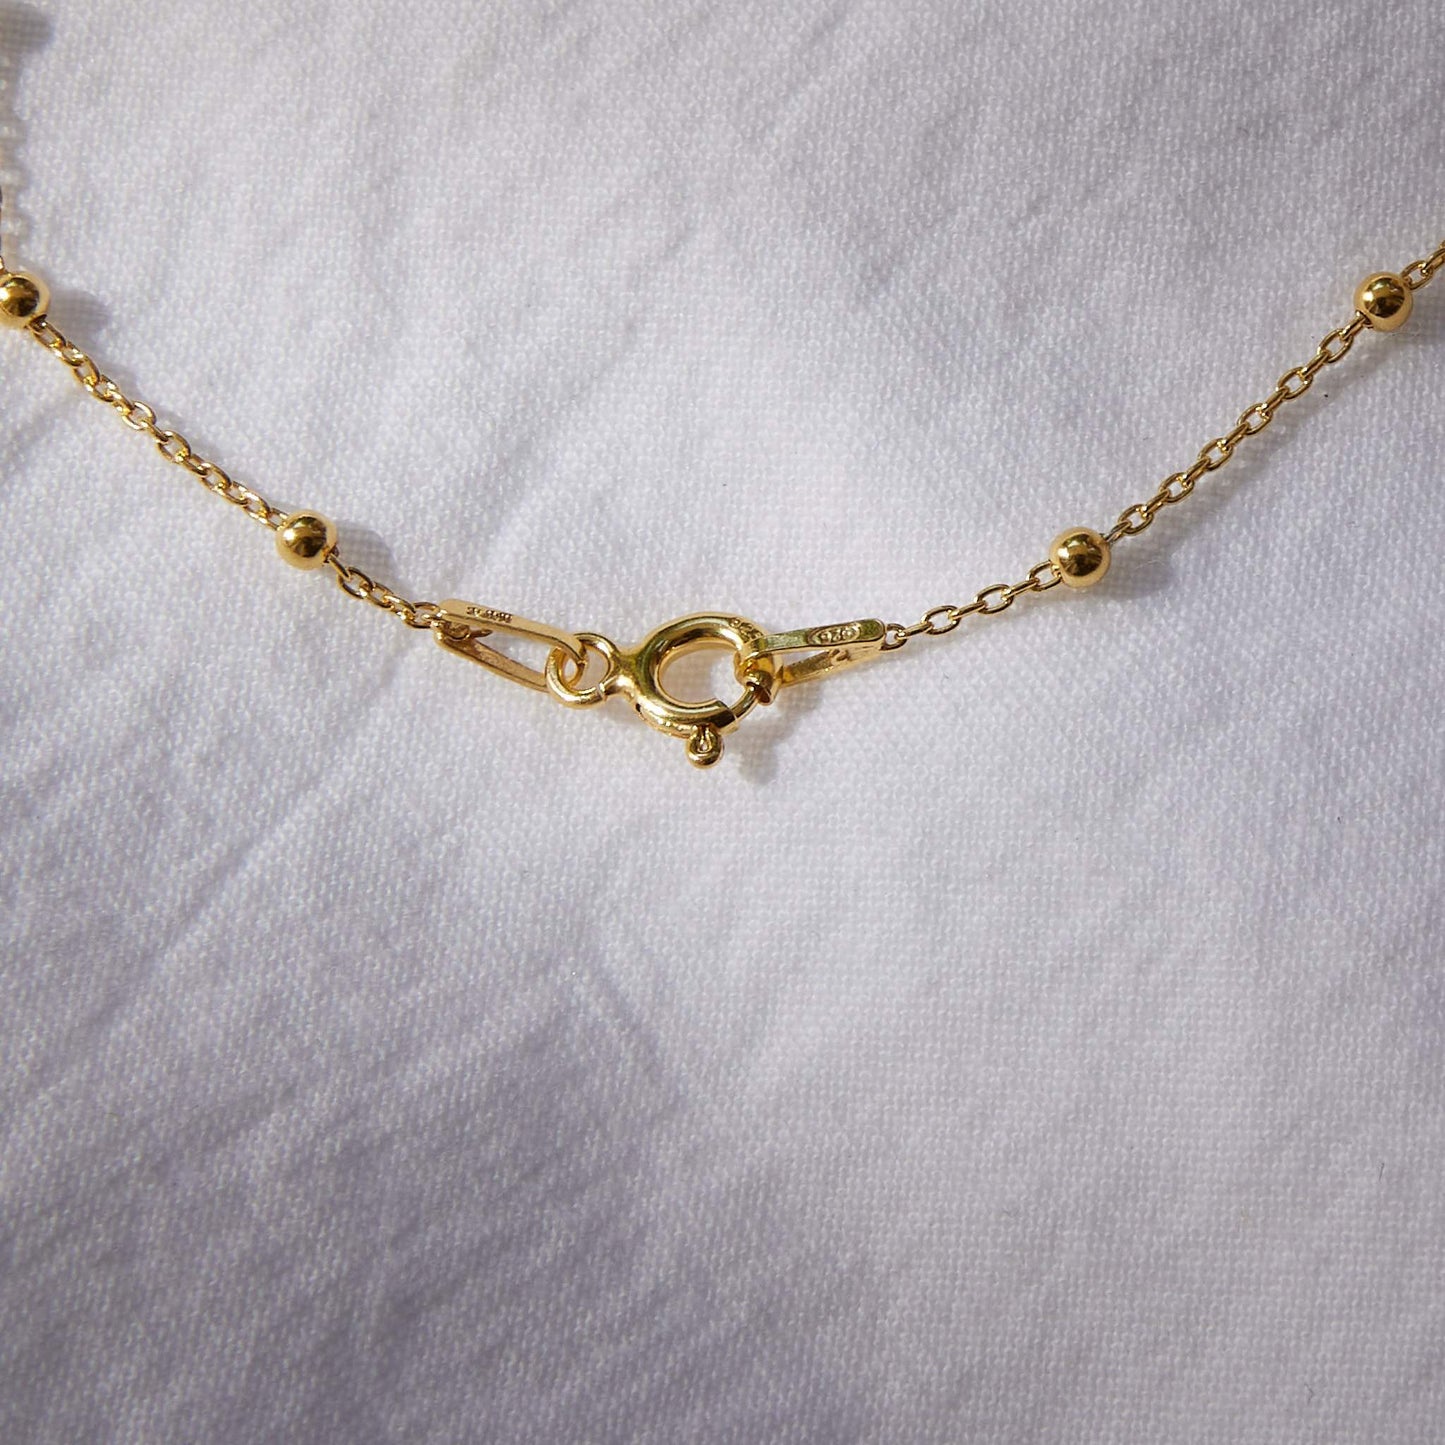 Freshwater coin pearl necklace